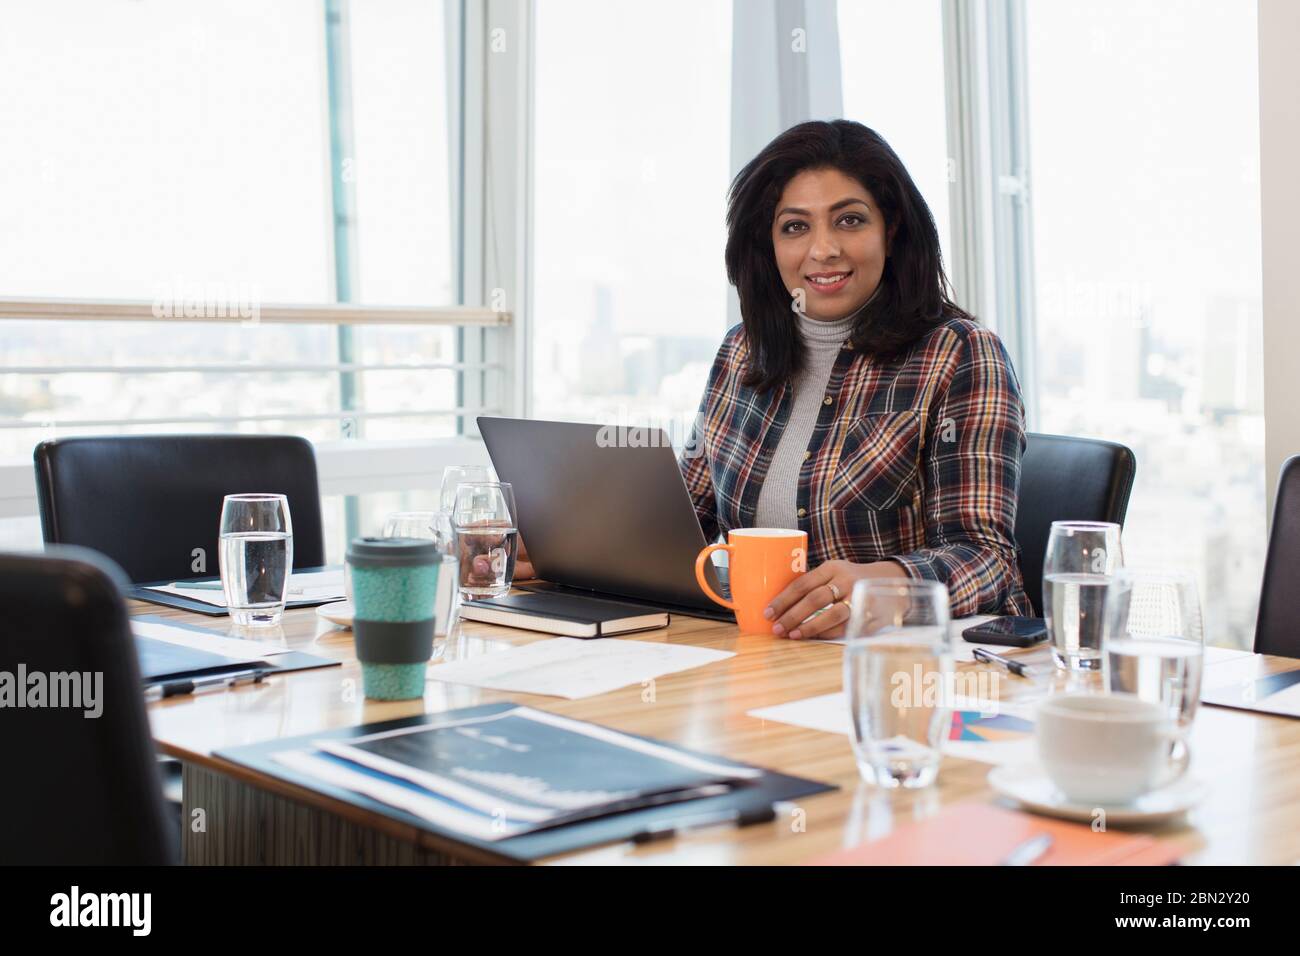 Portrait confident businesswoman using laptop at conference room table Stock Photo